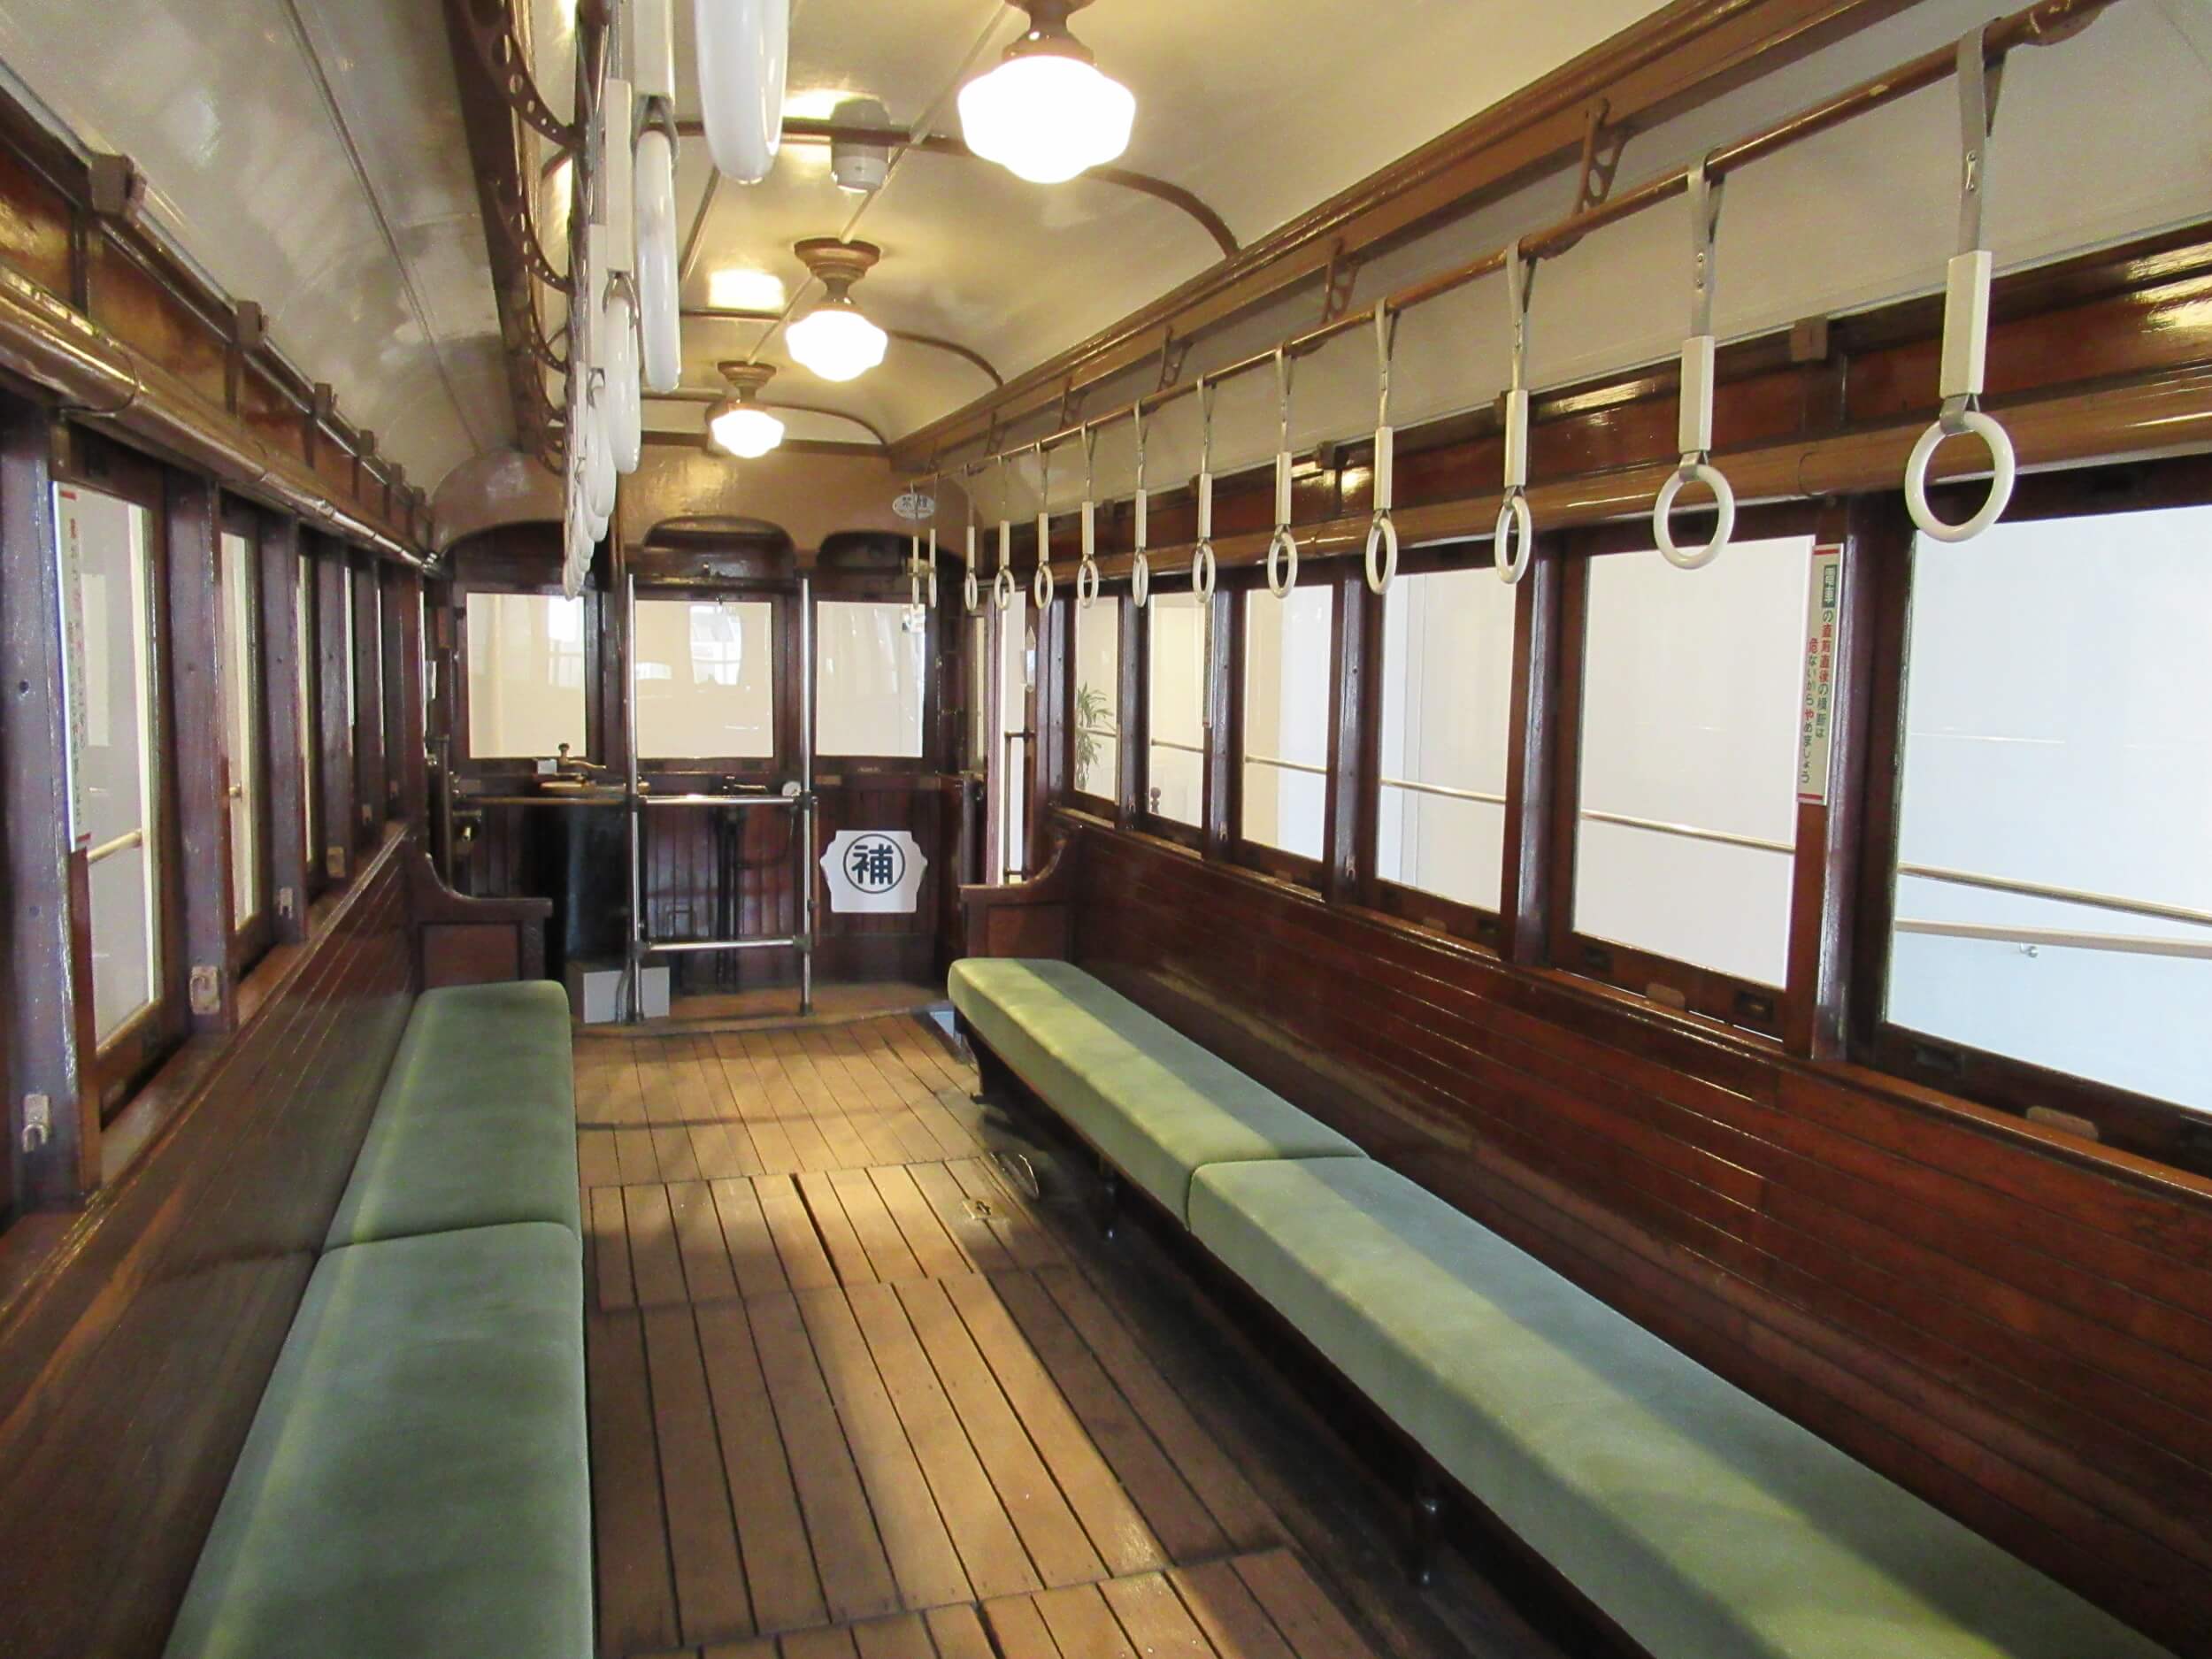 Archive hall of Shiden(Streetcar)・inside of the Streetcar